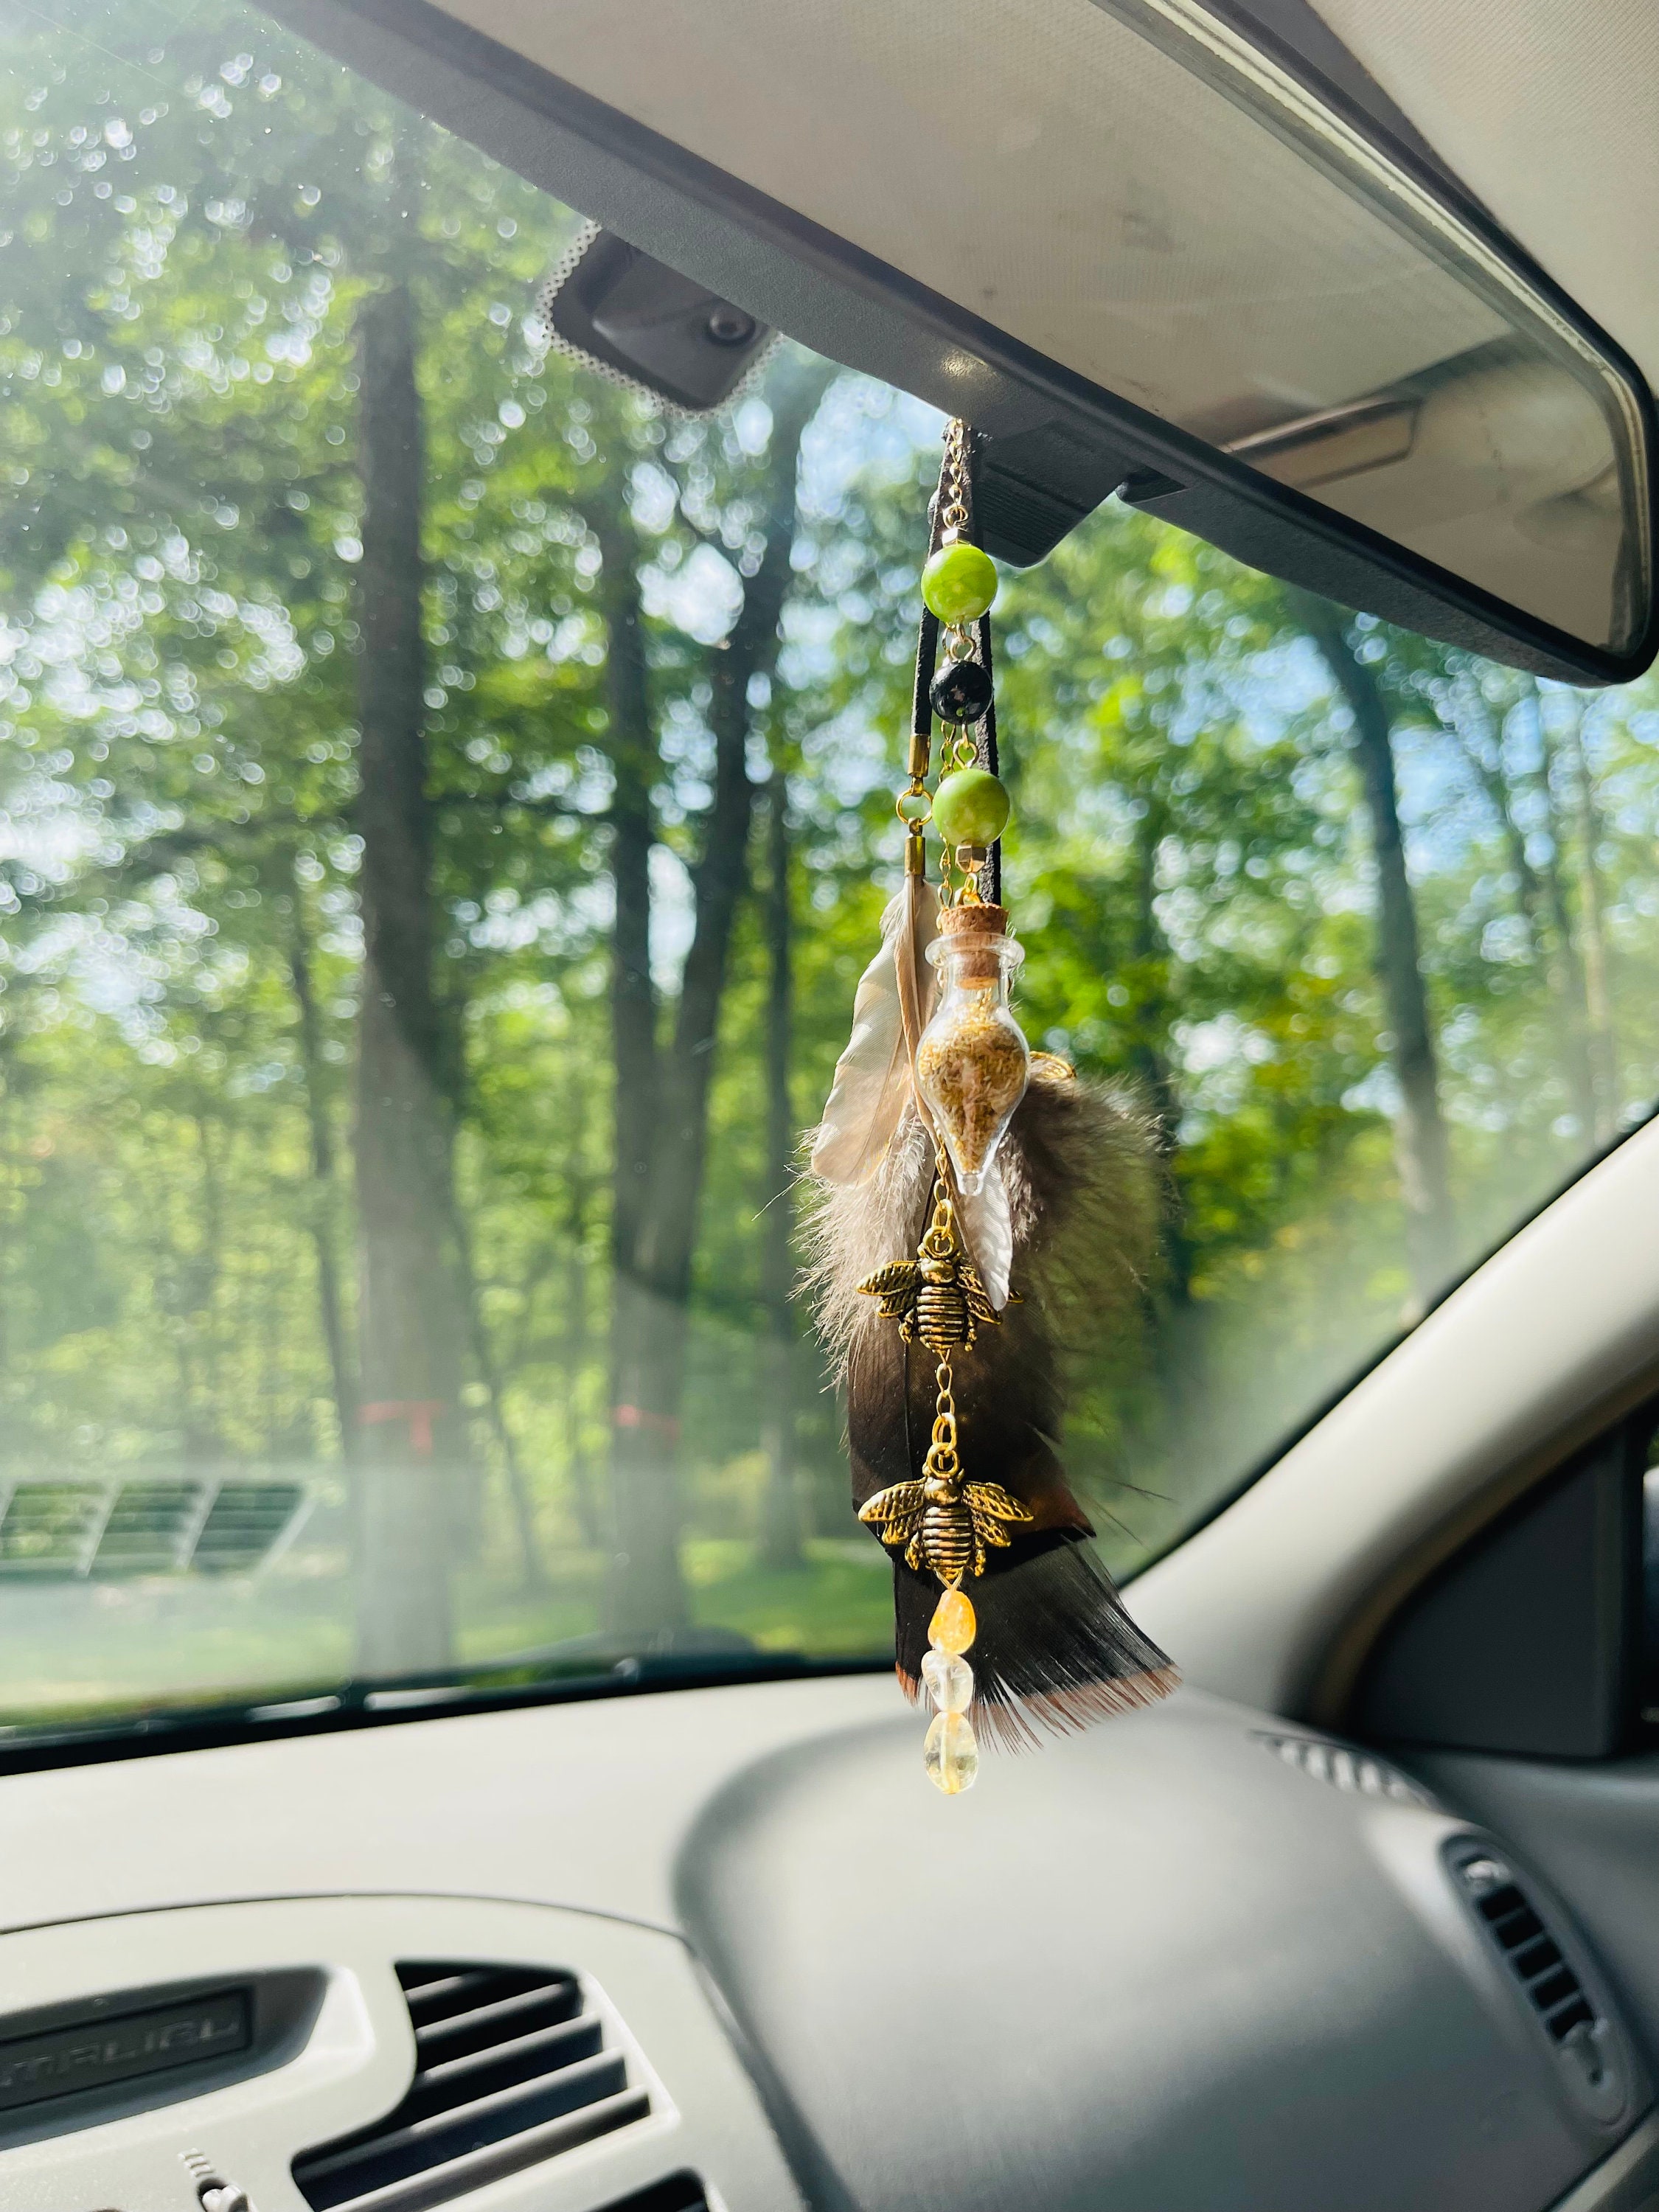 for Car Rearview Hanging Decor Handmade Nature Feather Small Car Charms Pendant Accessories Decorative Metal Trim for Crafts Beads on String Bills